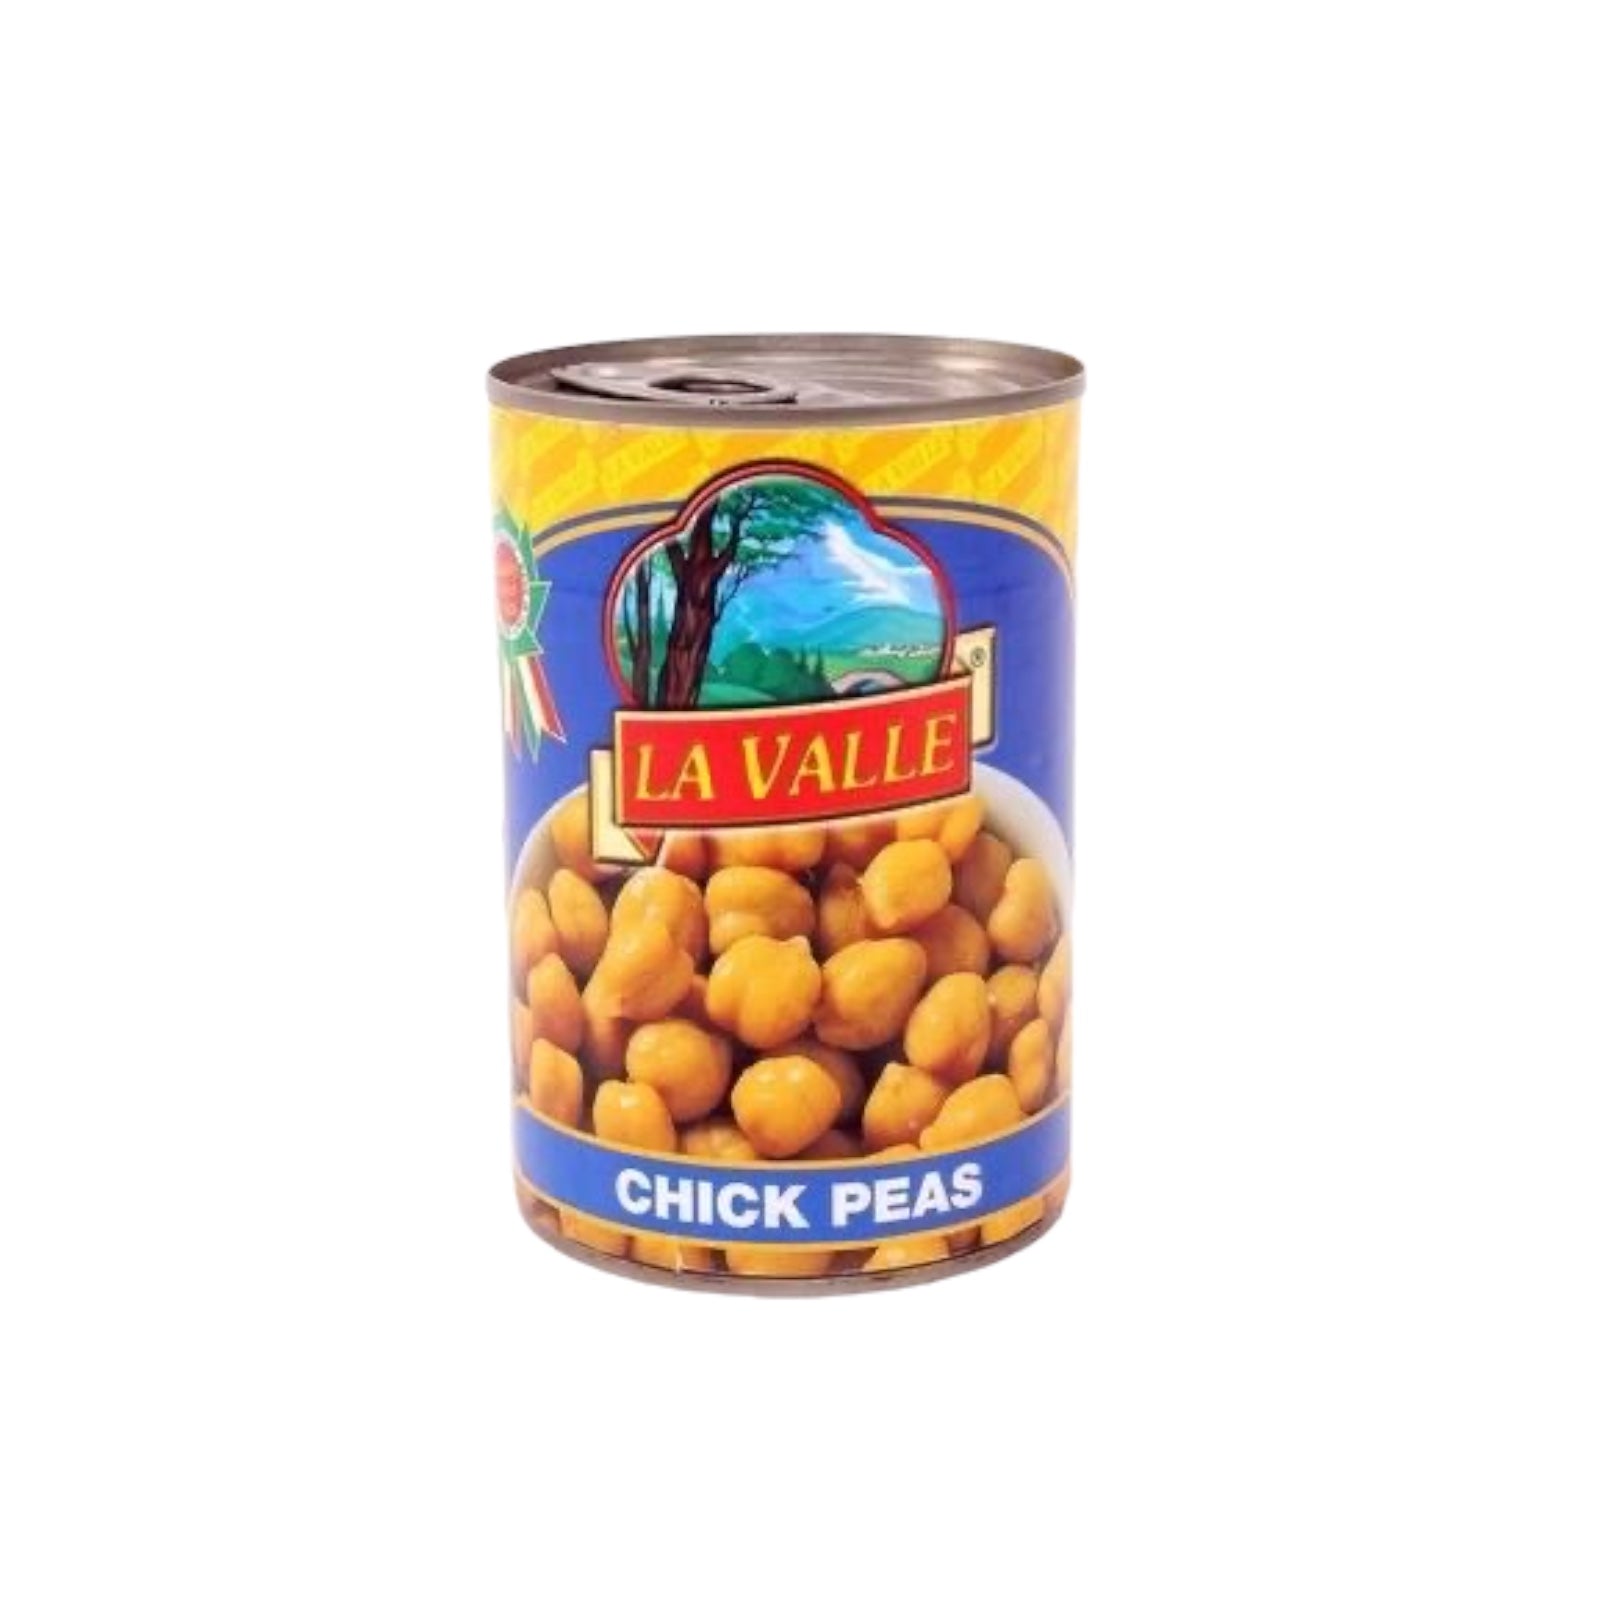 La Valle Chick Peas 400g
Product of Italy